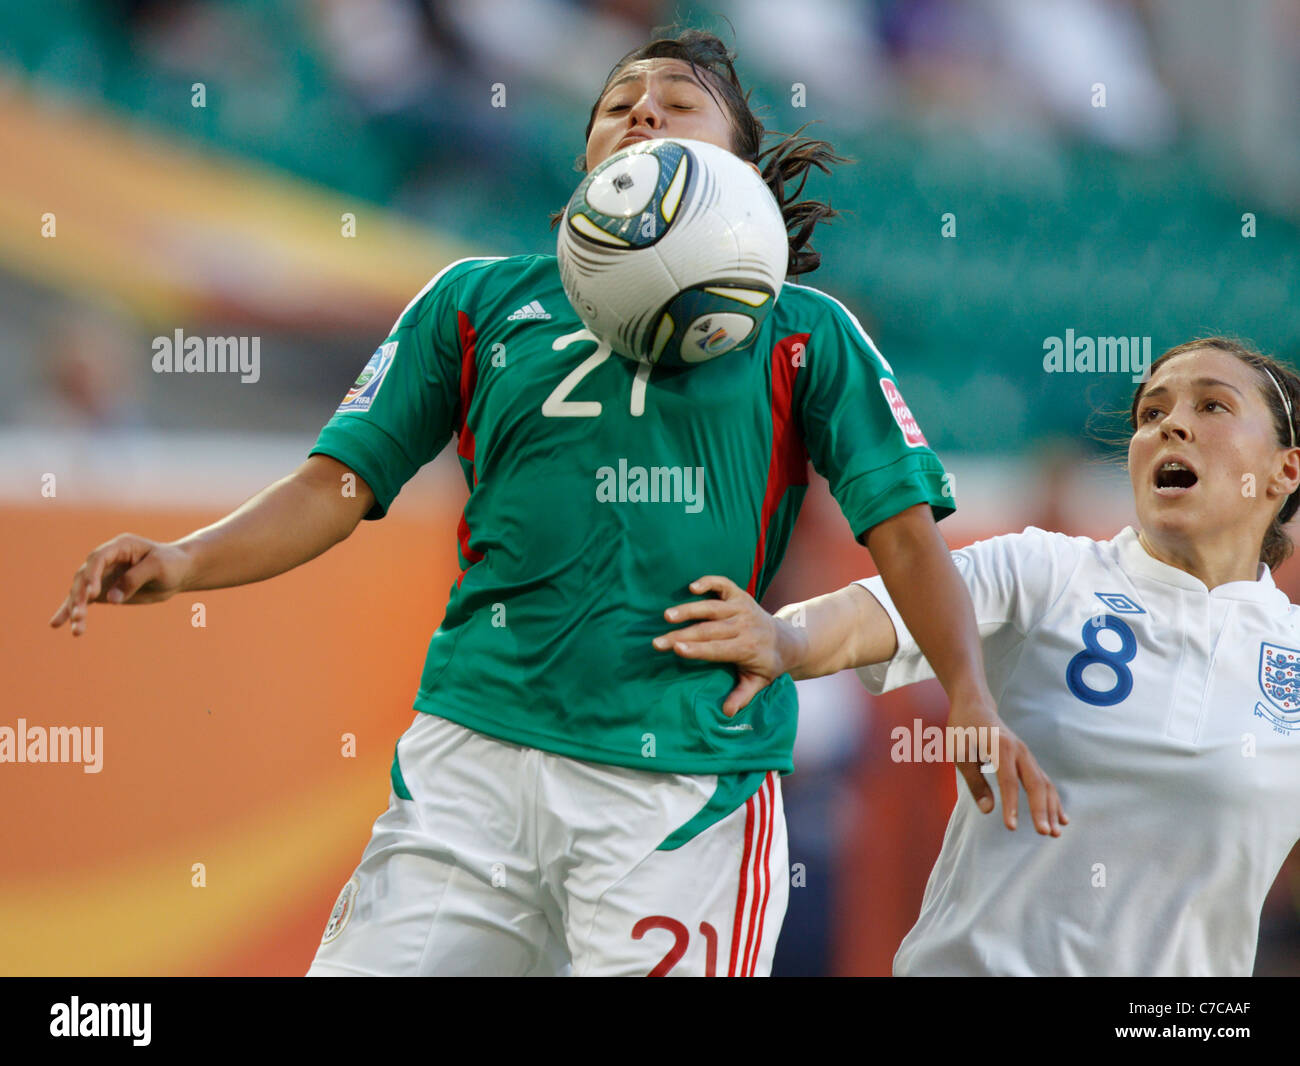 Stephany Mayor of Mexico (21) brings the ball down against Fara Williams of England (8) during a 2011 Women's World Cup match. Stock Photo